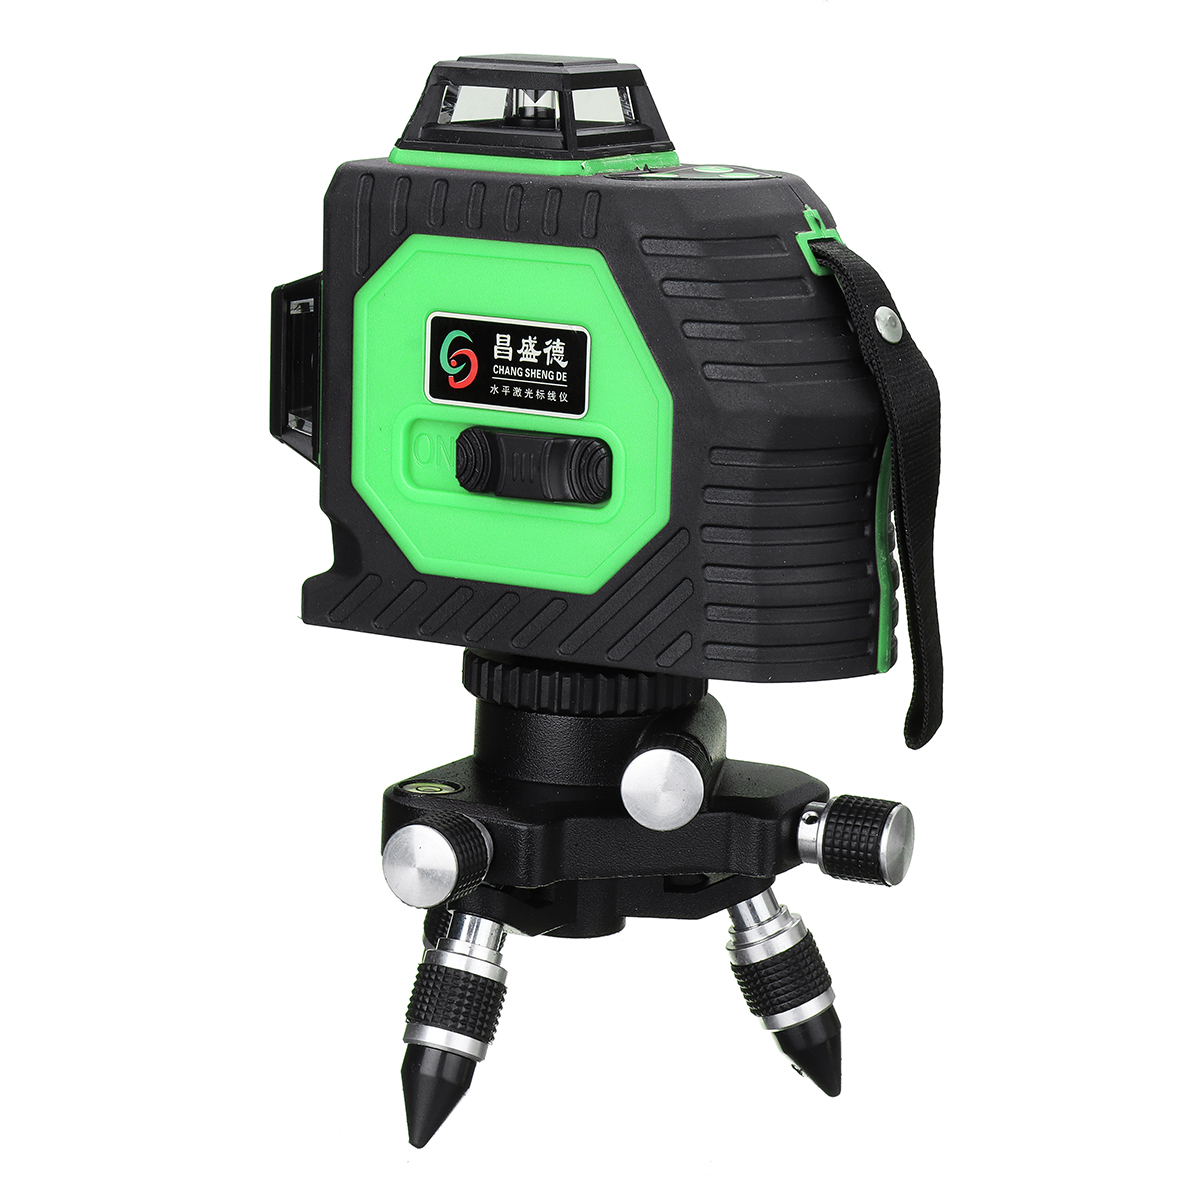 

3D Laser Level 12 Line Green Self Leveling Outdoor Rotary Cross Measure Kit